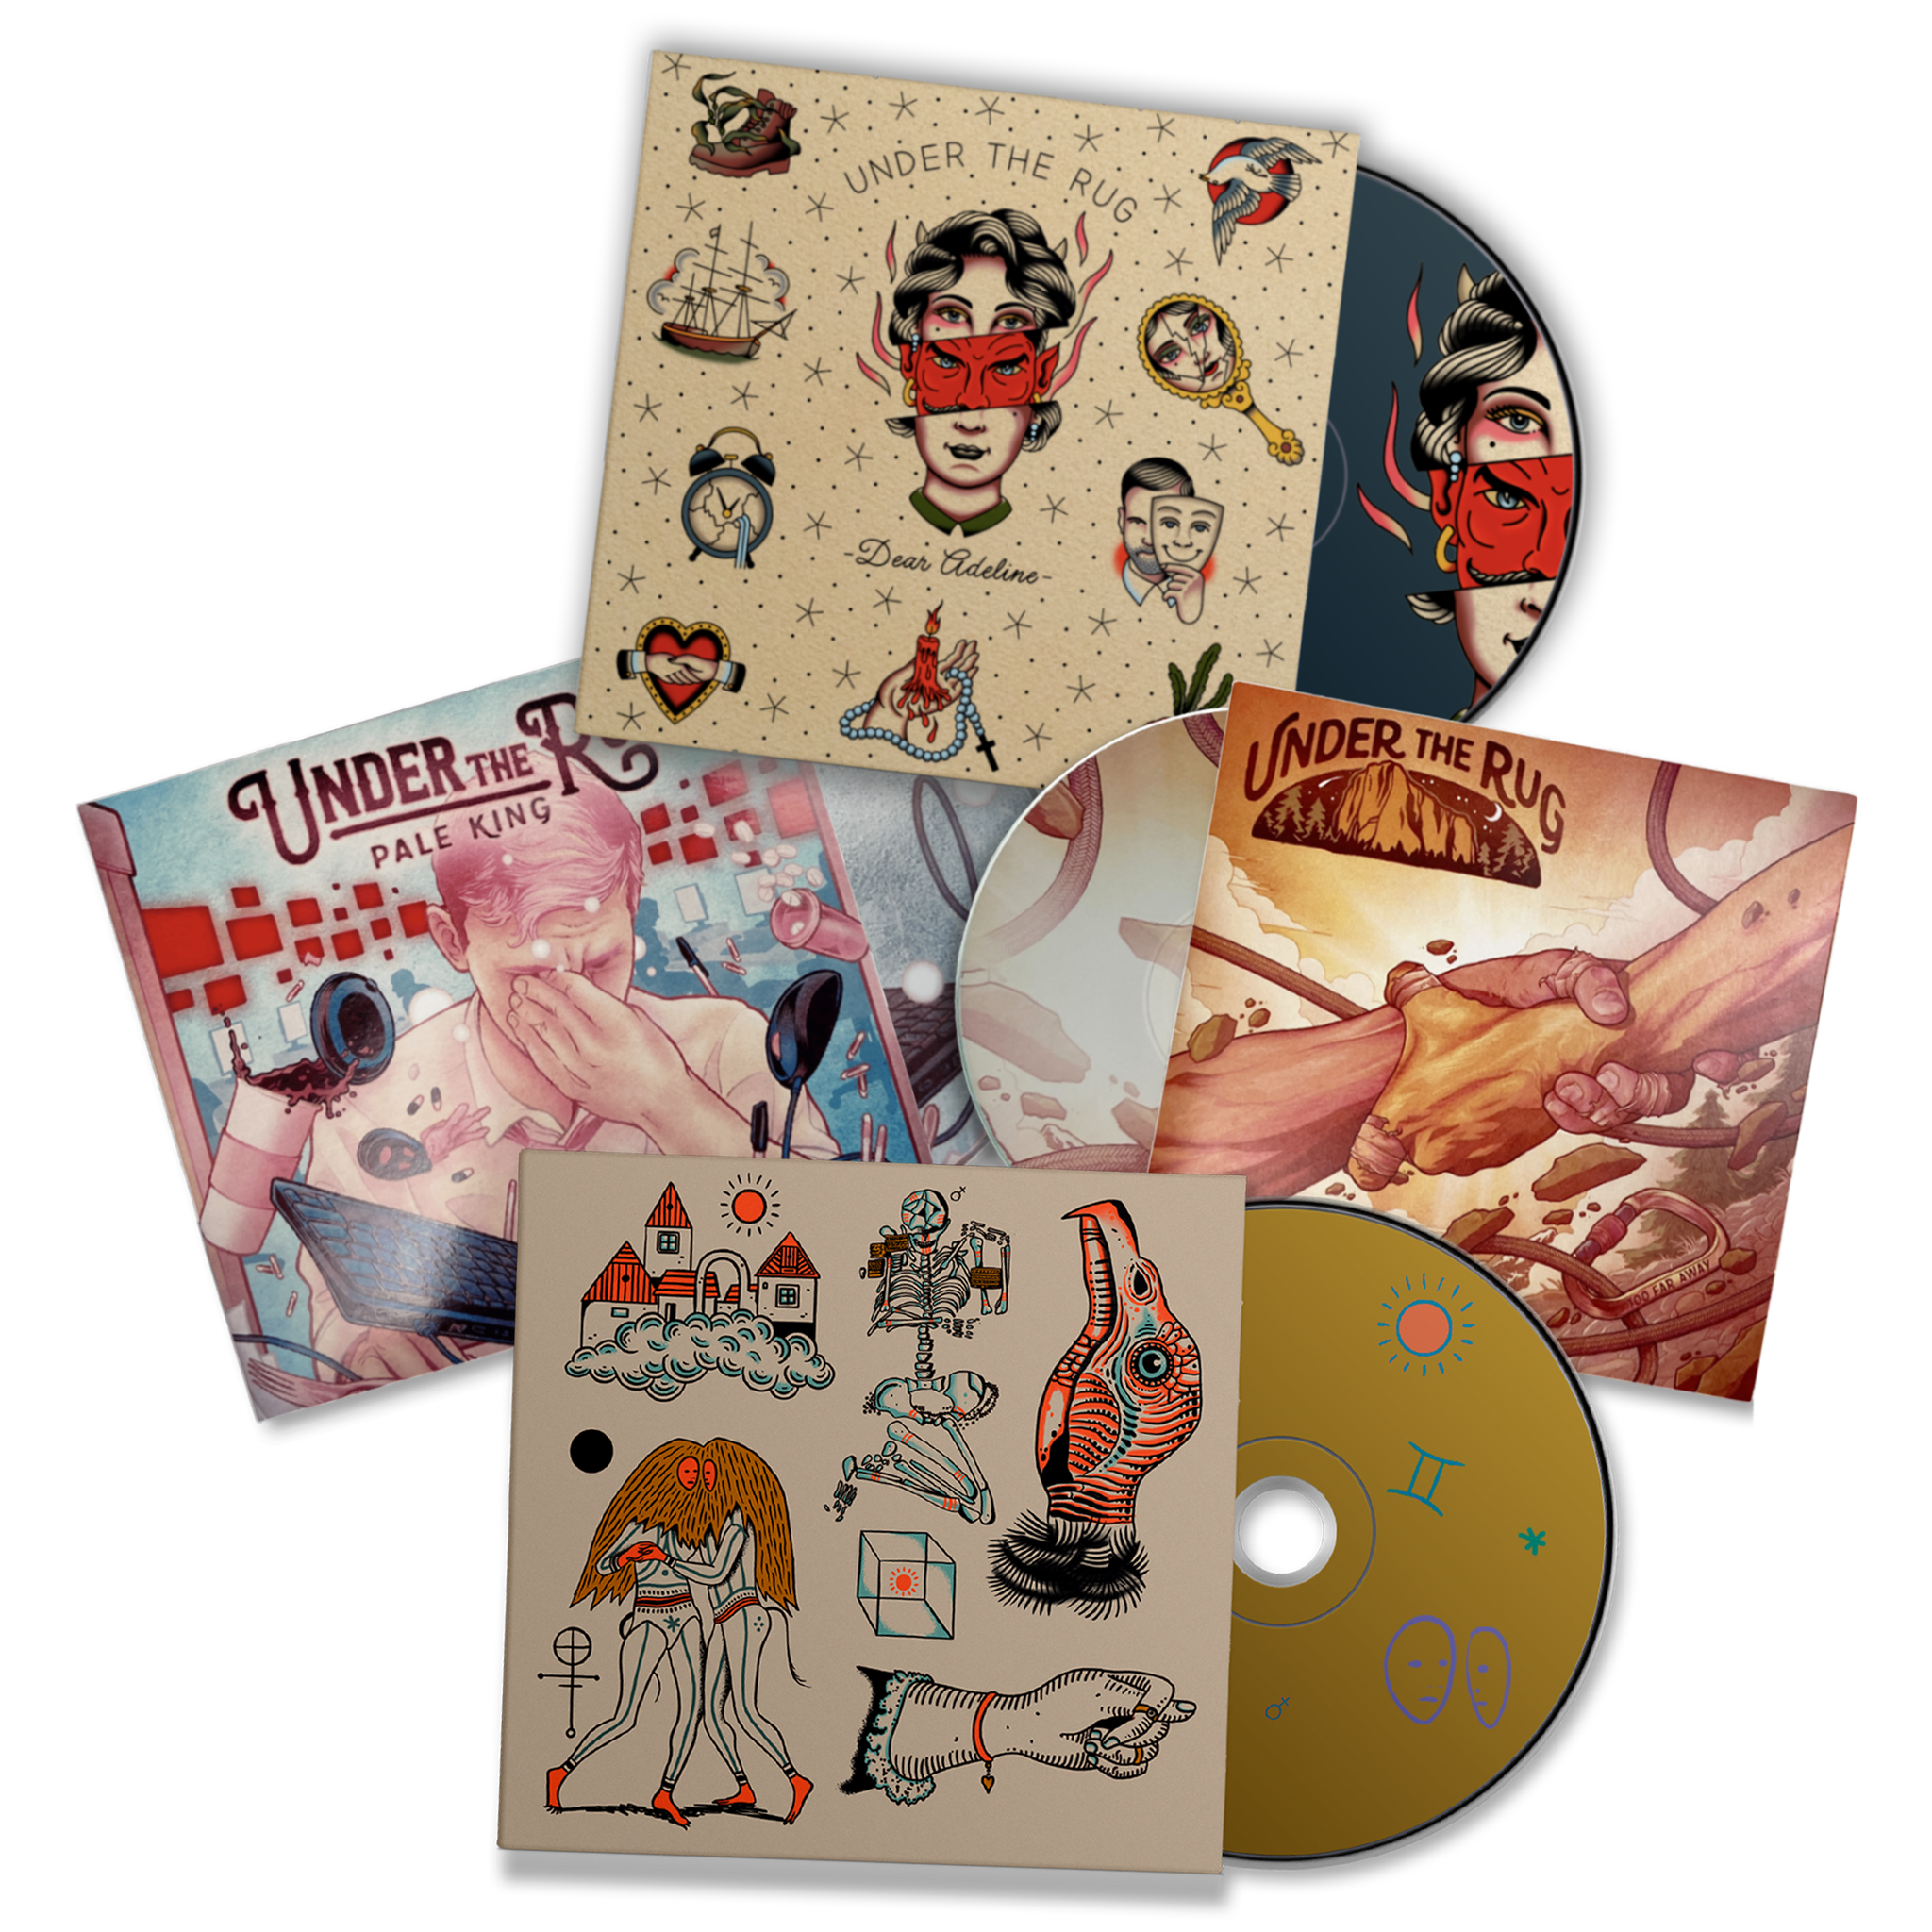 All Releases - CD Bundle